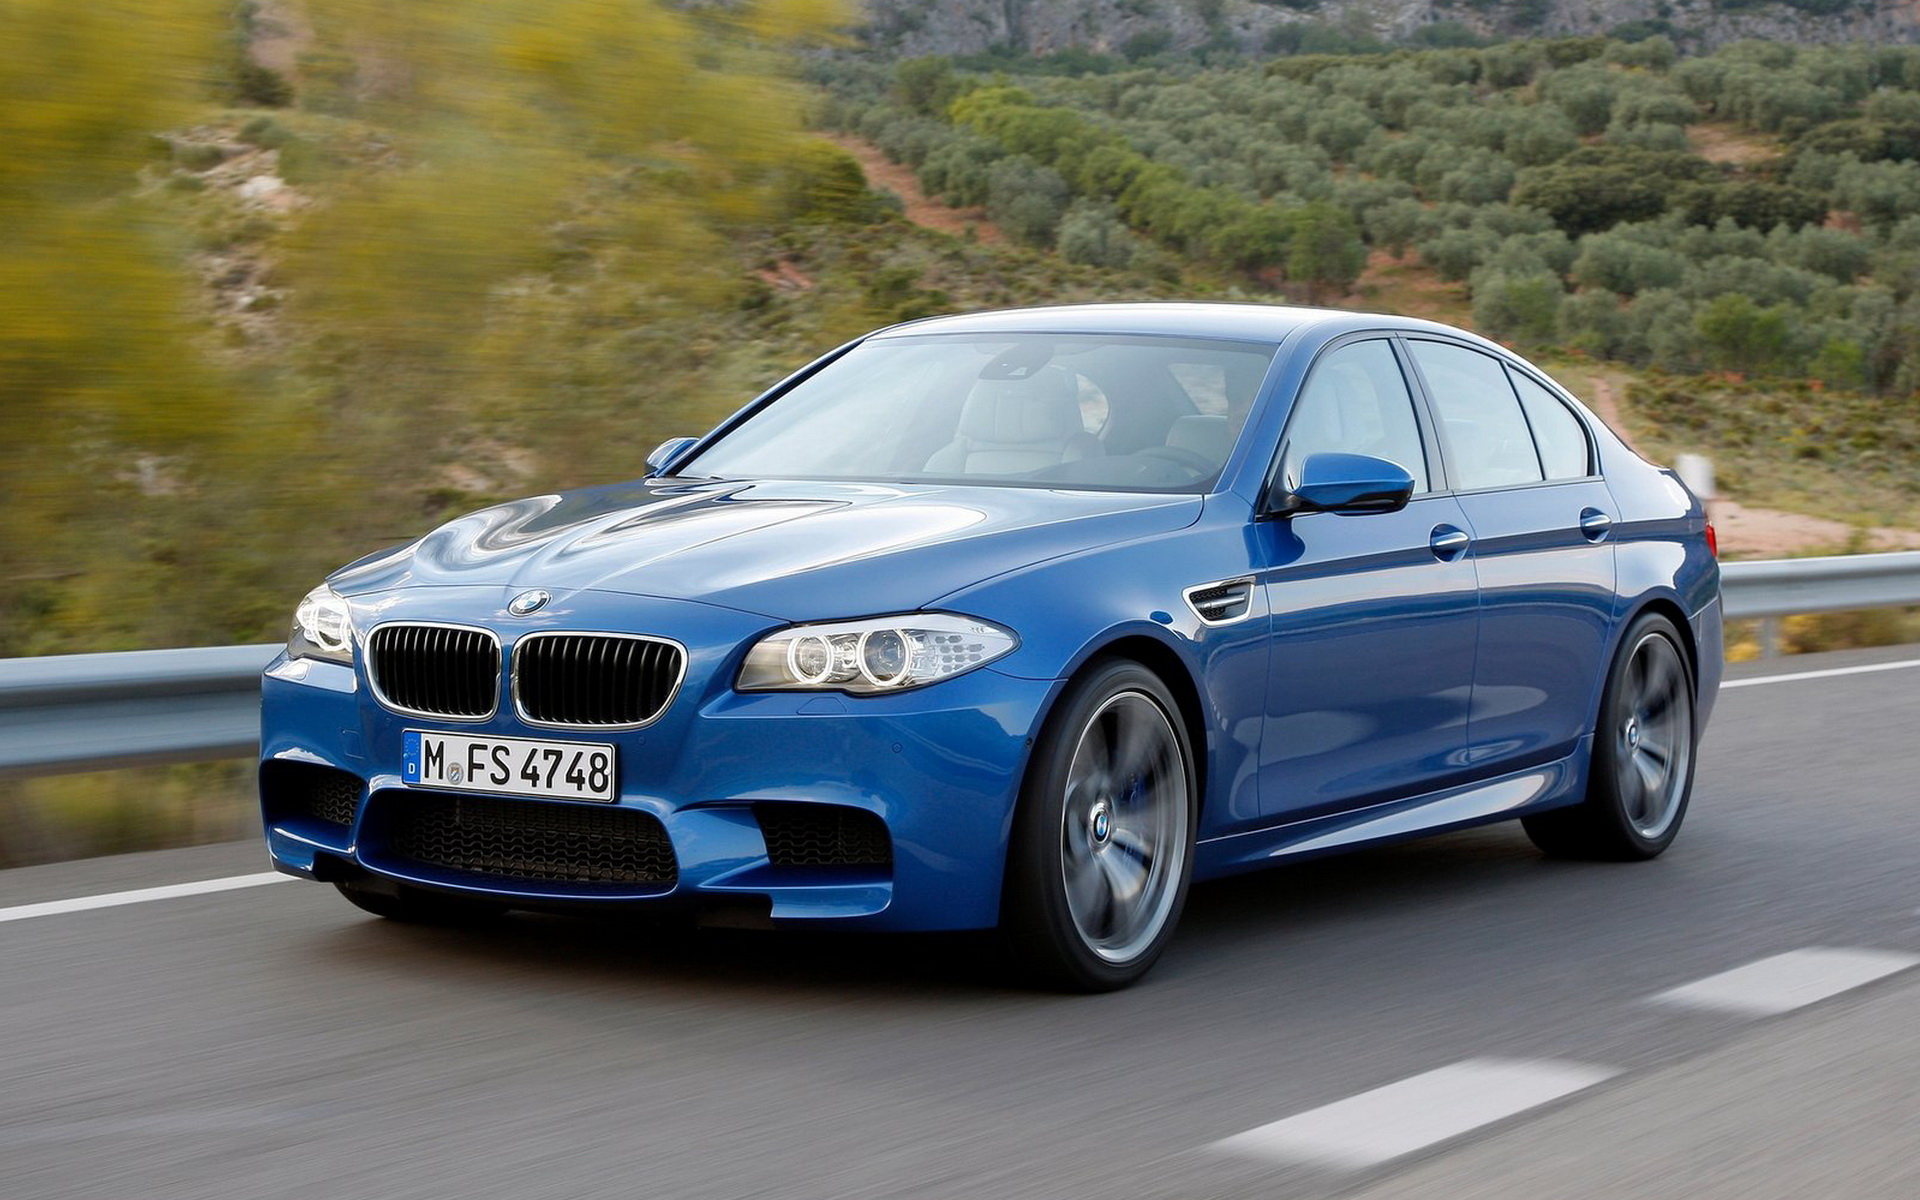 BMW-M5 2012 wallpapers and images - wallpapers, pictures, photos